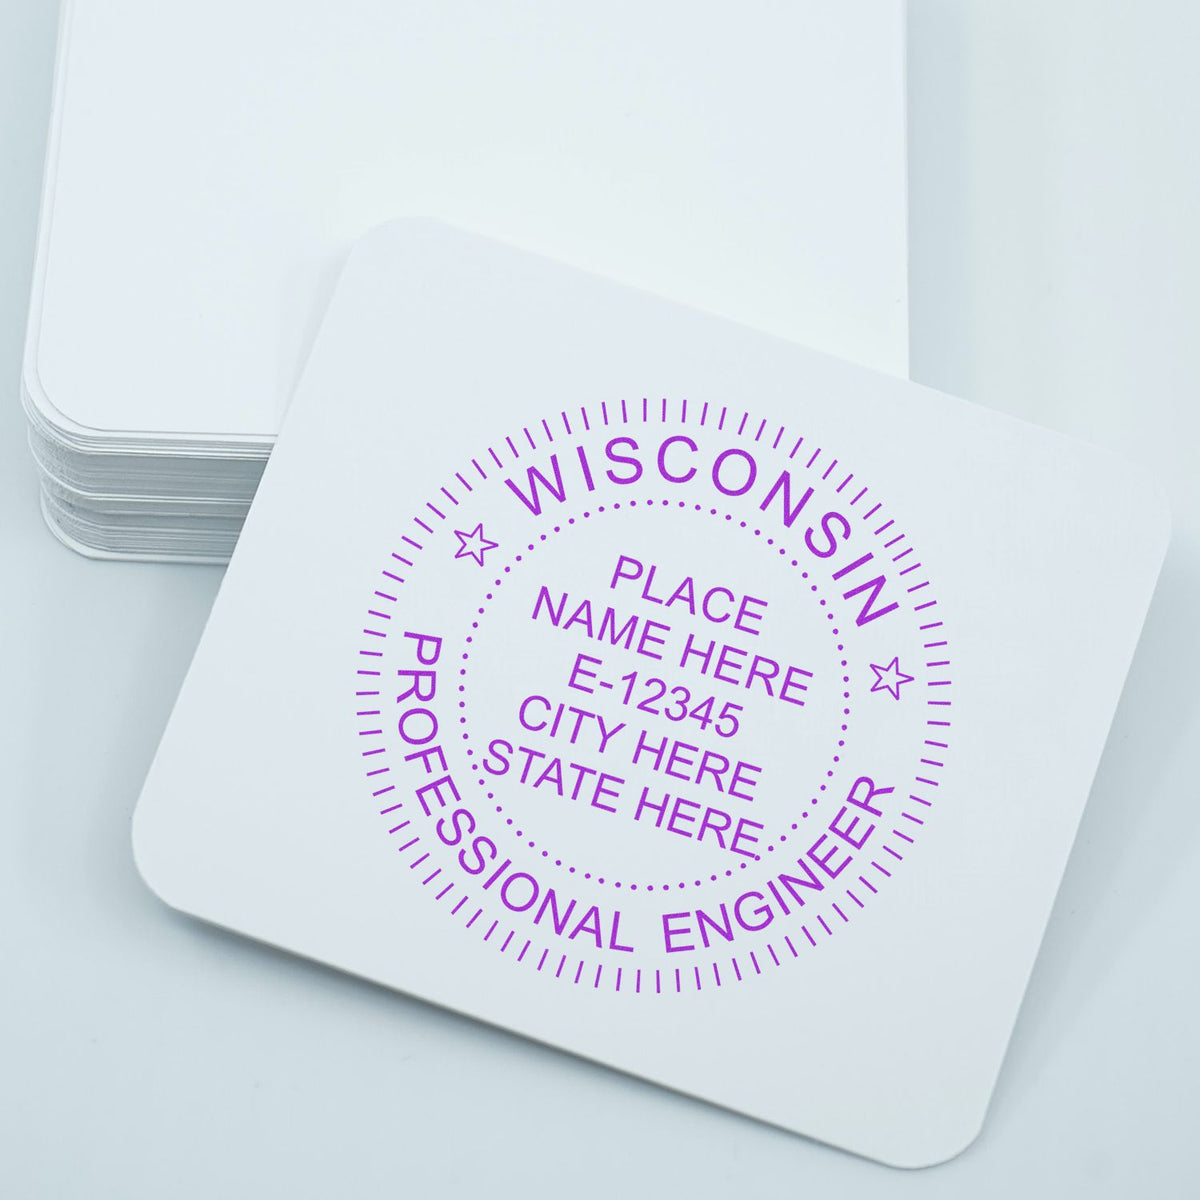 An alternative view of the Slim Pre-Inked Wisconsin Professional Engineer Seal Stamp stamped on a sheet of paper showing the image in use